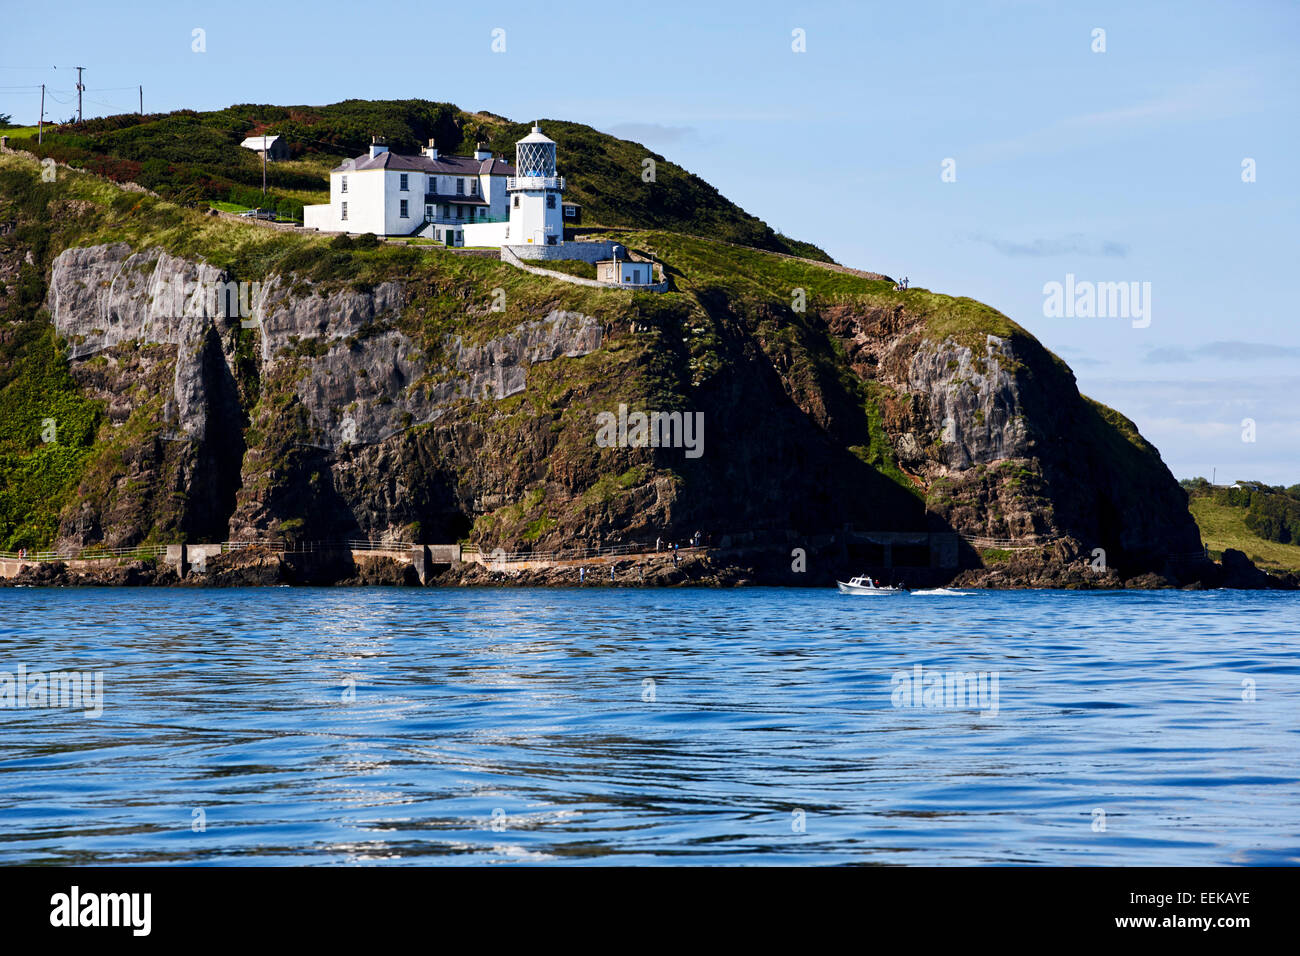 Blackhead lighthouse on clifftop in county antrim northern ireland Stock Photo